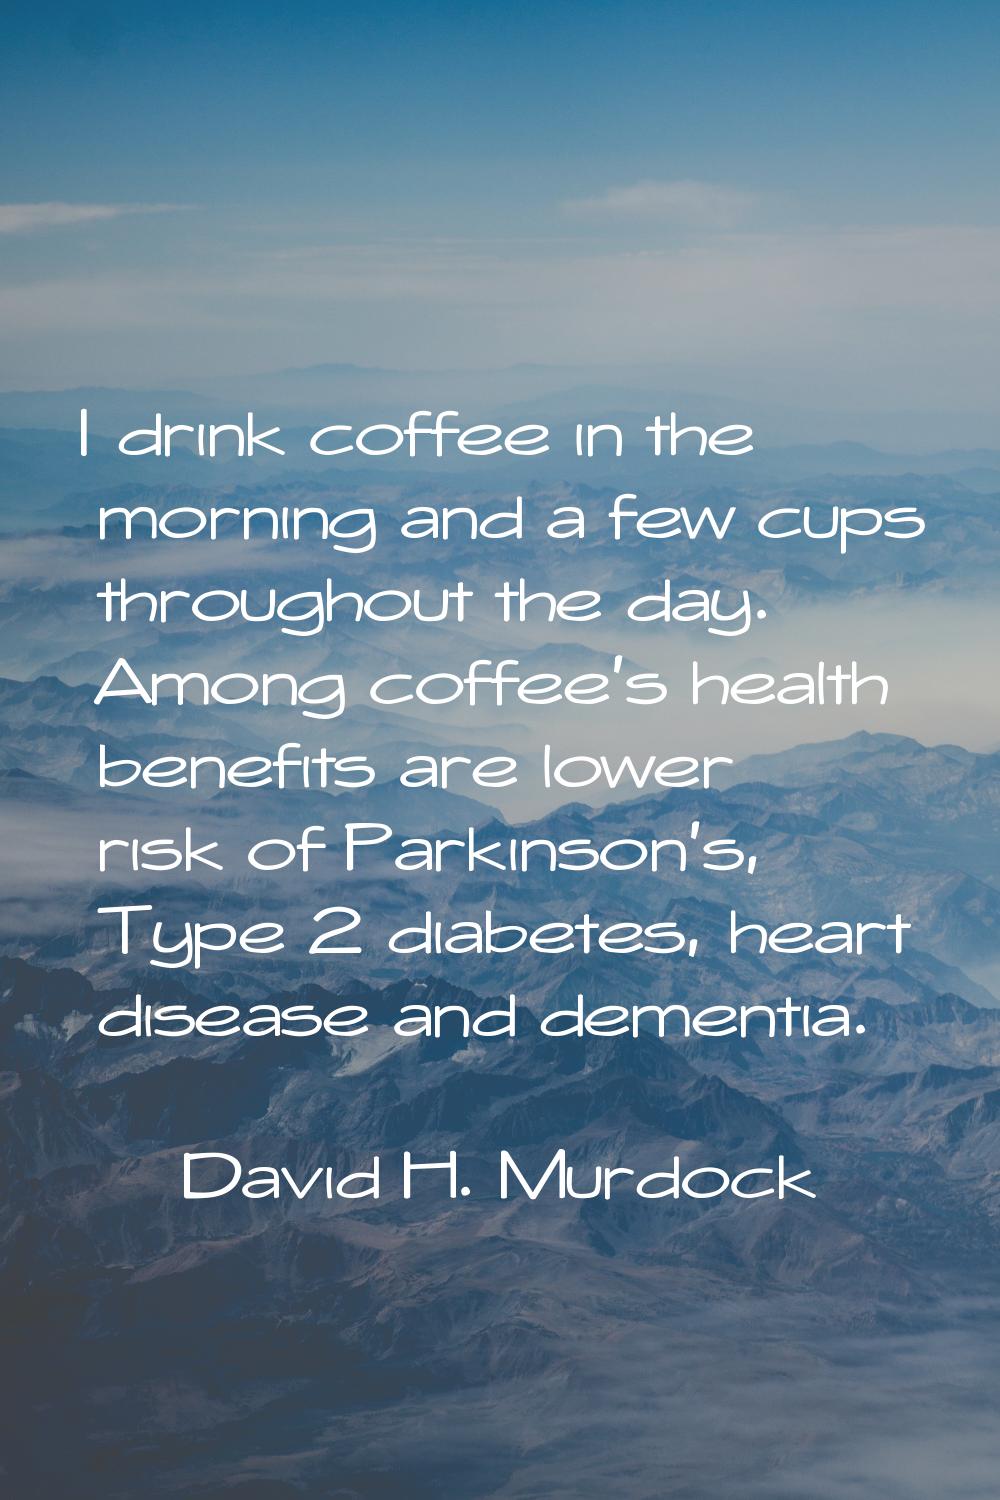 I drink coffee in the morning and a few cups throughout the day. Among coffee's health benefits are